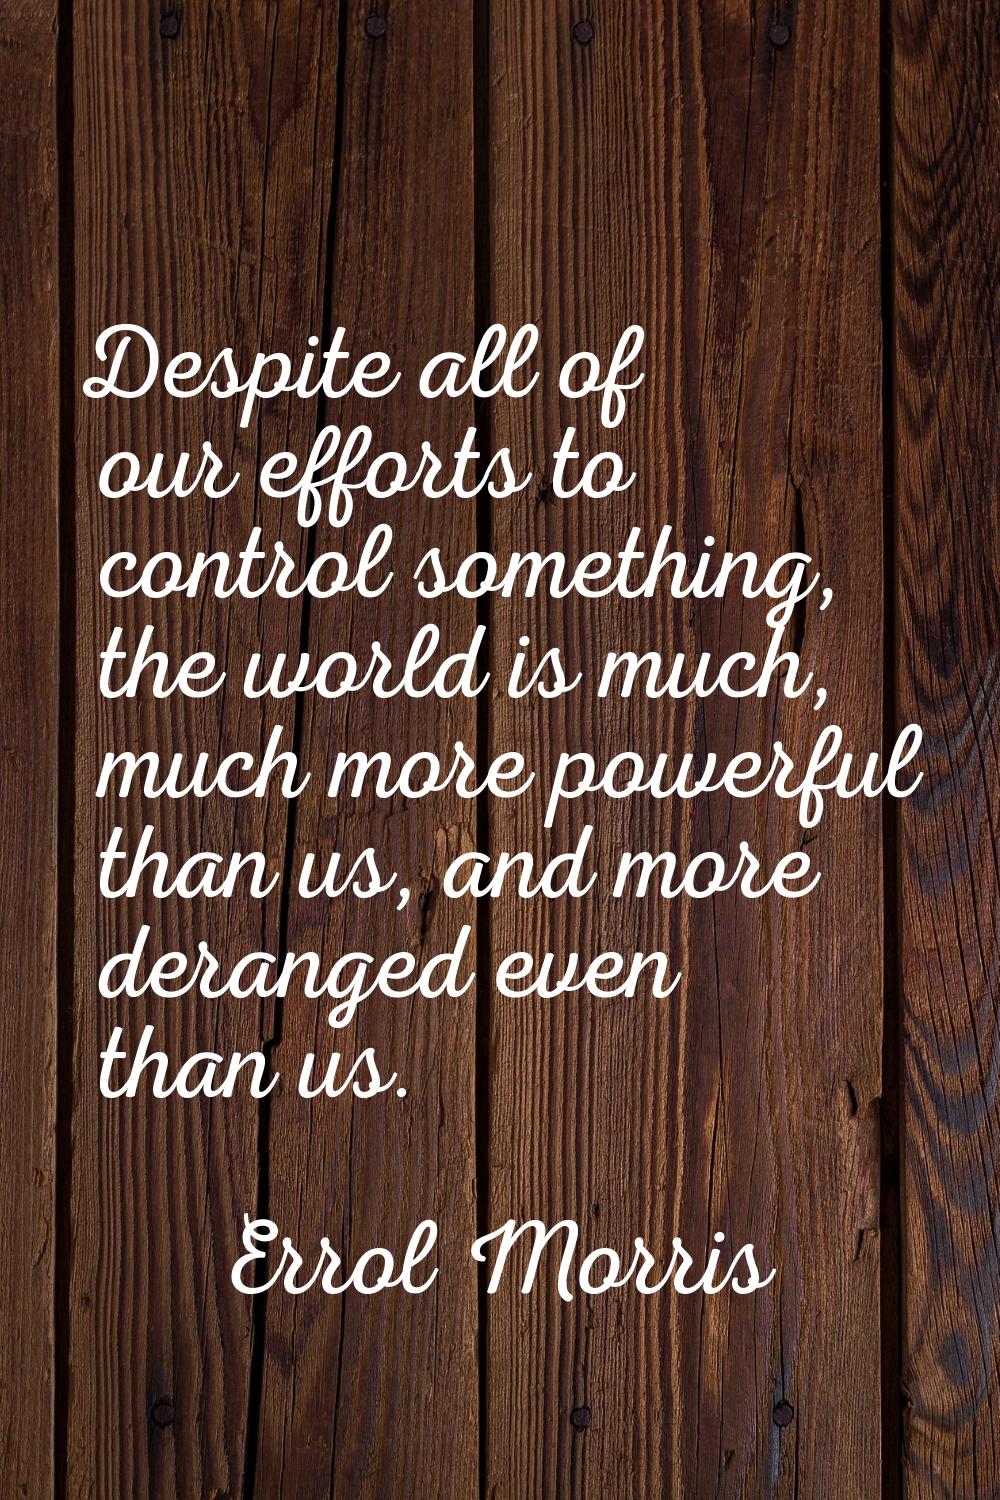 Despite all of our efforts to control something, the world is much, much more powerful than us, and